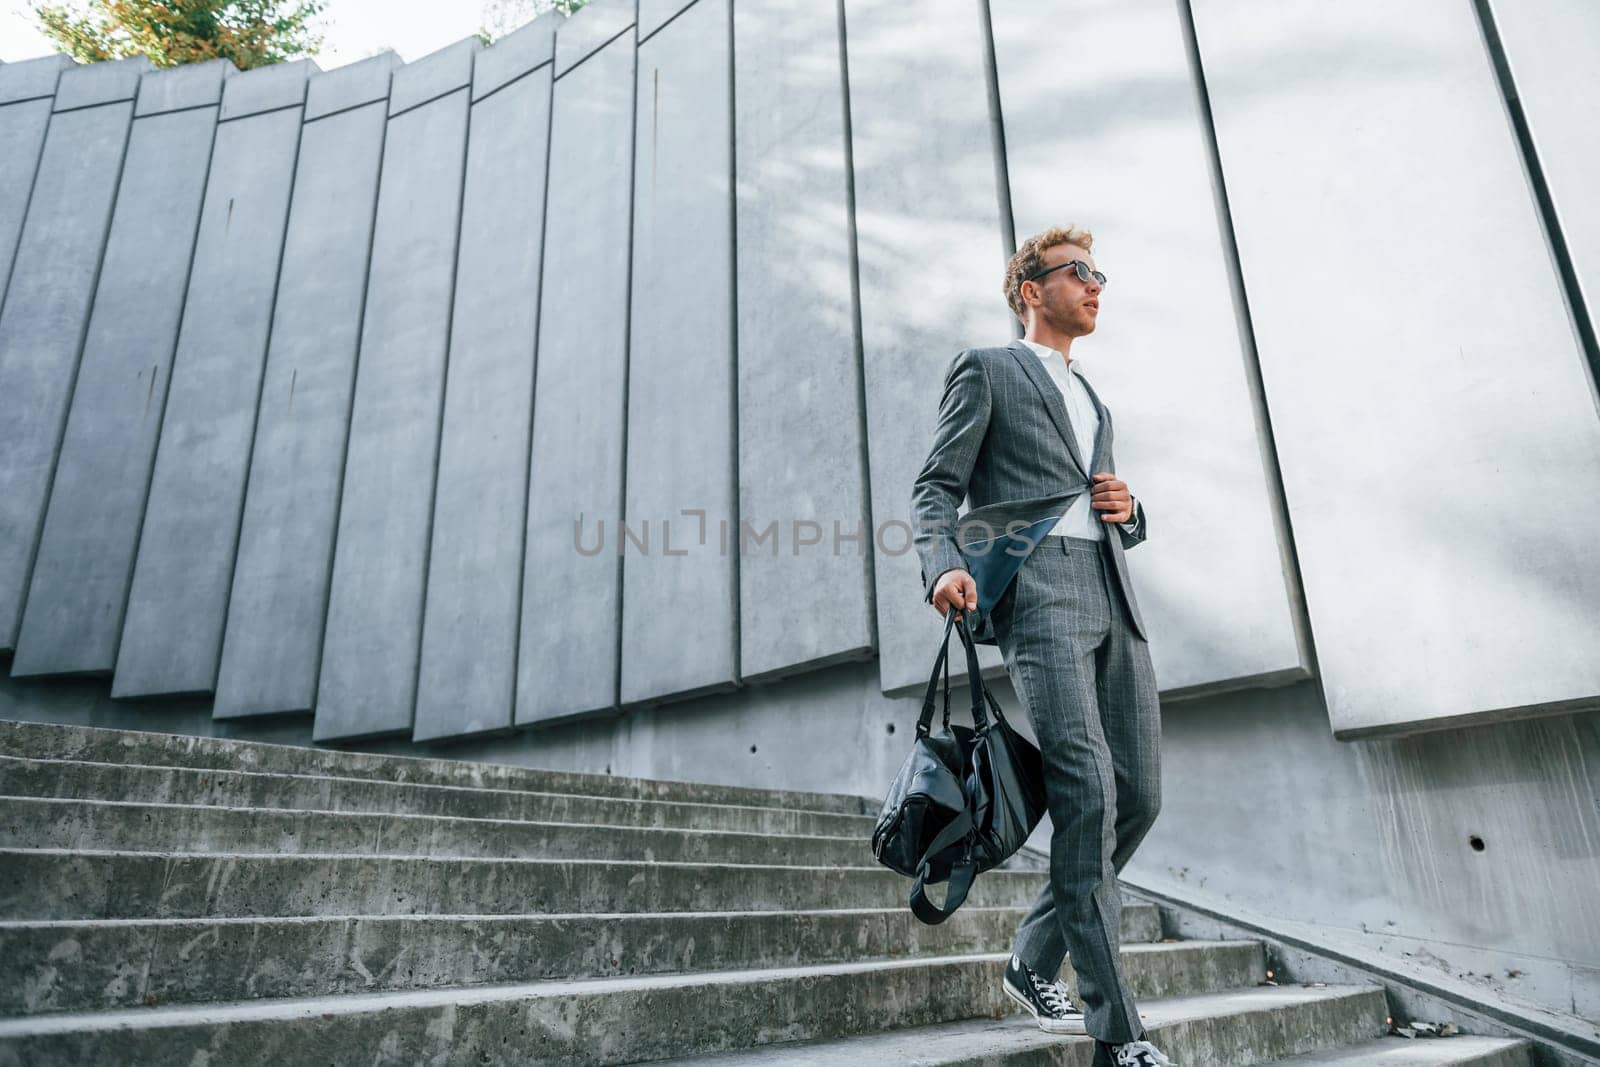 Going down by the stairs. Young businessman in grey formal wear is outdoors in the city.